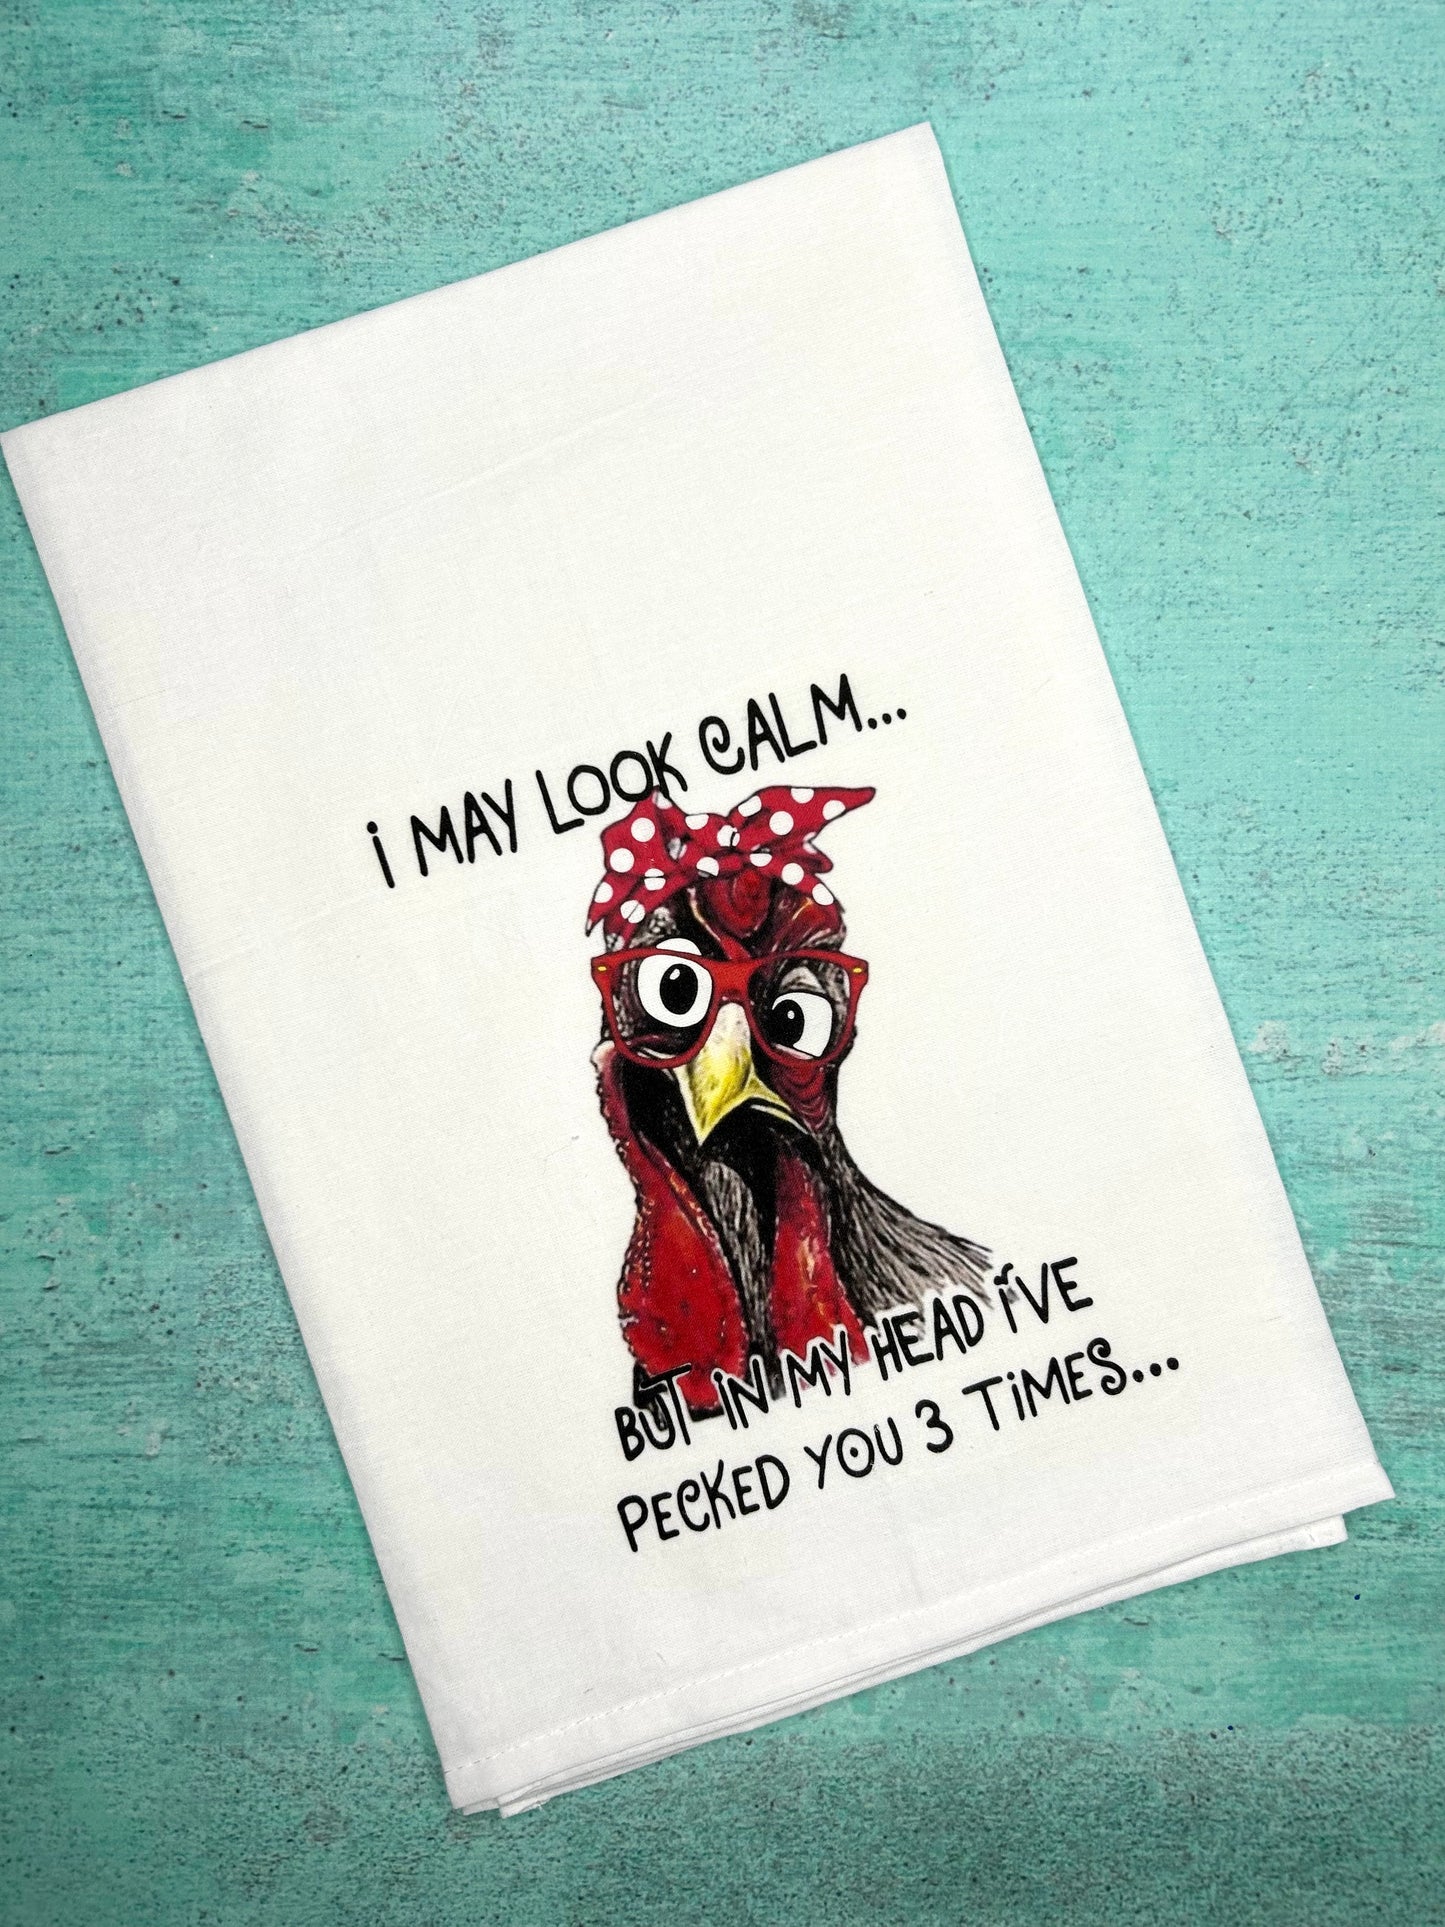 I May Look Calm...But in My Head I've Pecked You 3 Times Tea Towel